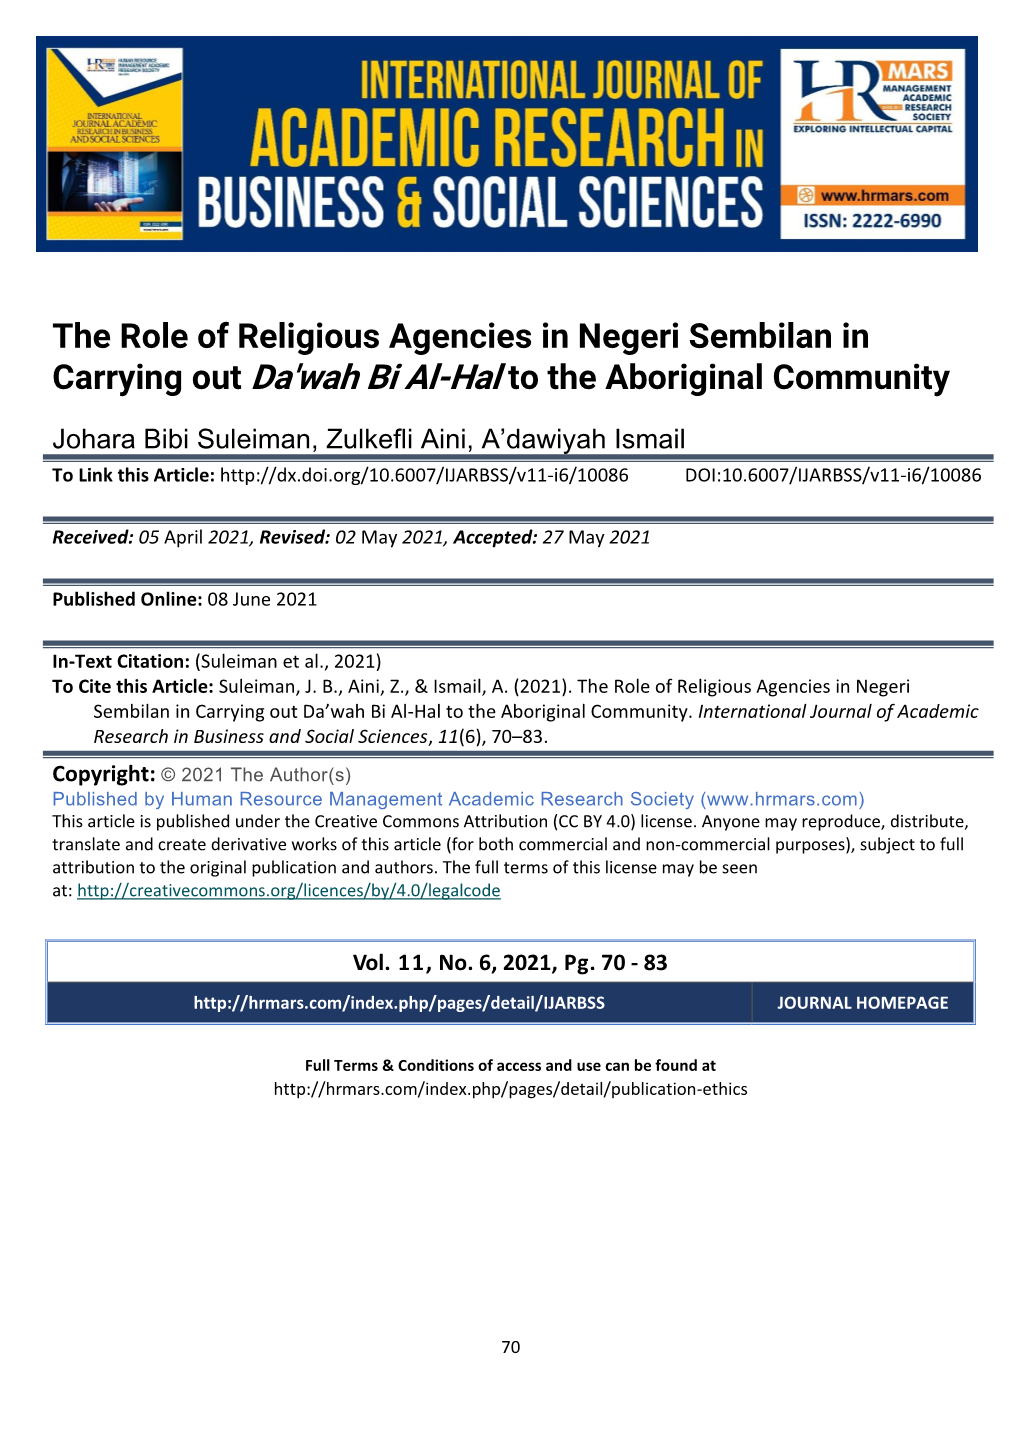 The Role of Religious Agencies in Negeri Sembilan in Carrying out Da'wah Bi Al-Hal to the Aboriginal Community